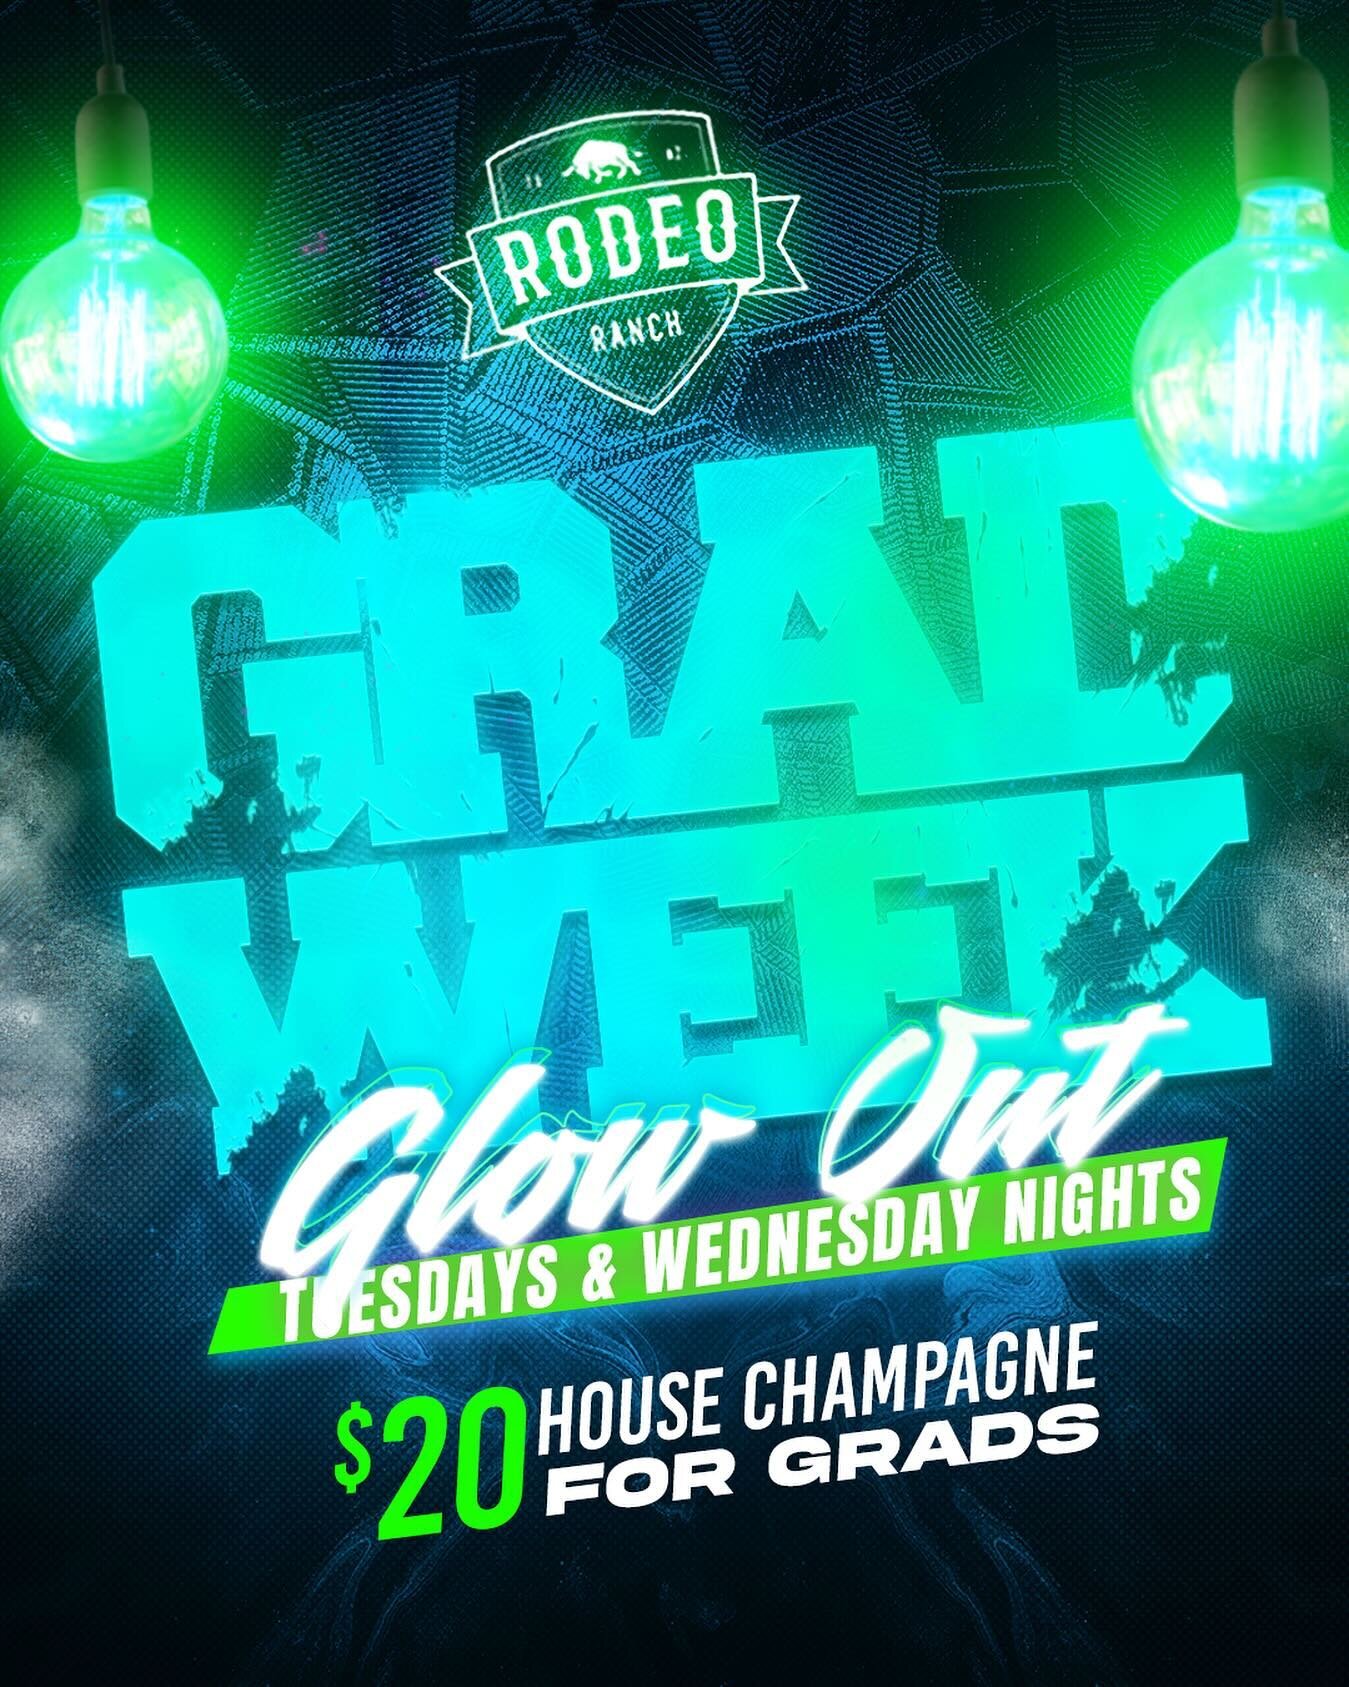 $20 champagne bottles for grads tonight and tomorrow! 🍾